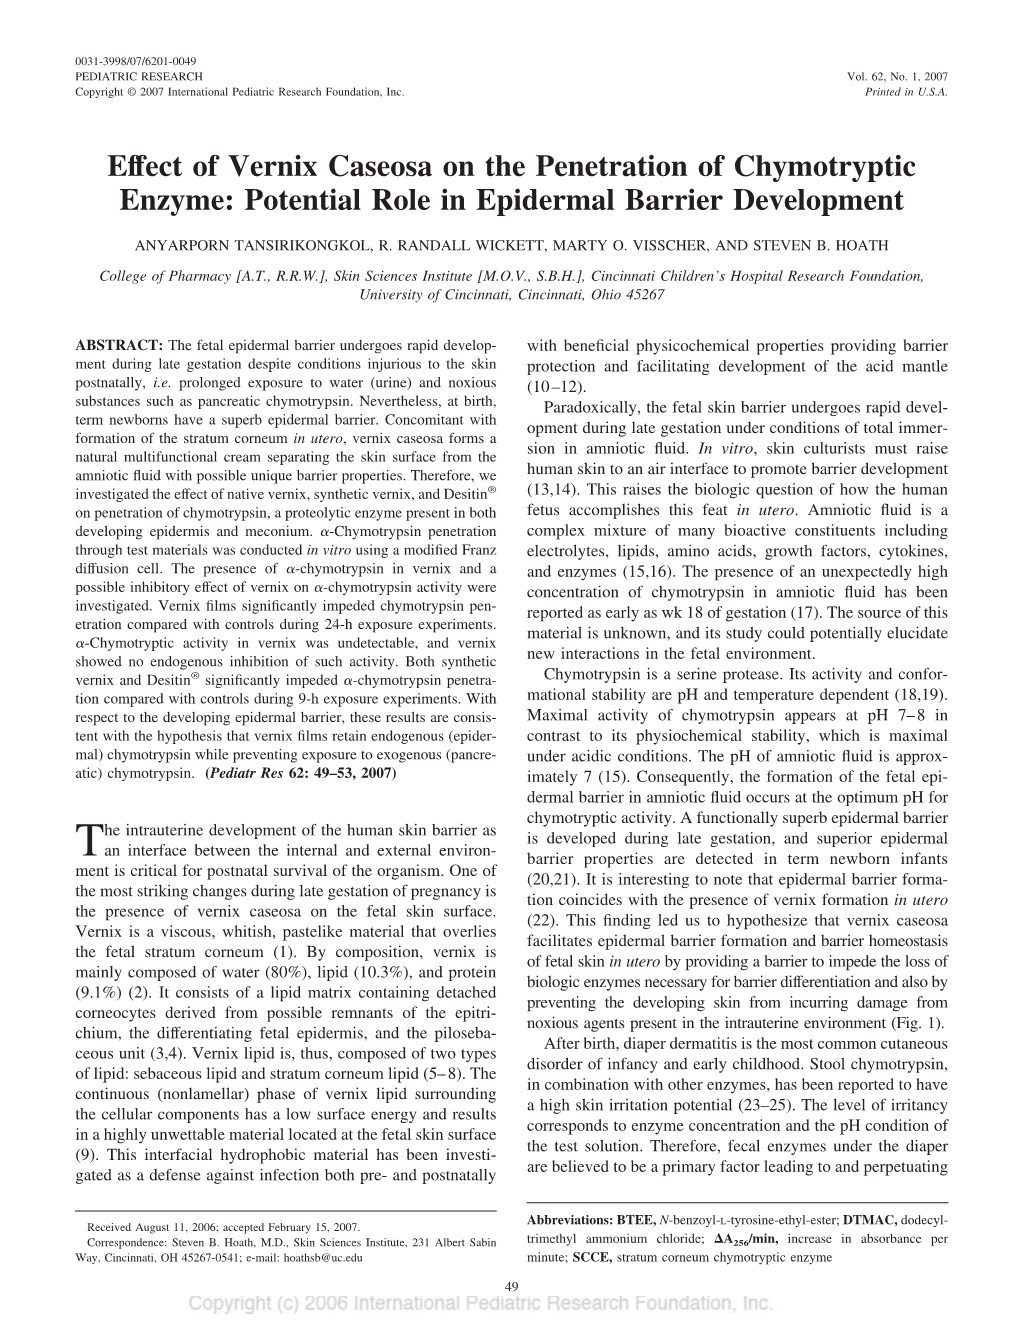 Effect of Vernix Caseosa on the Penetration of Chymotryptic Enzyme: Potential Role in Epidermal Barrier Development